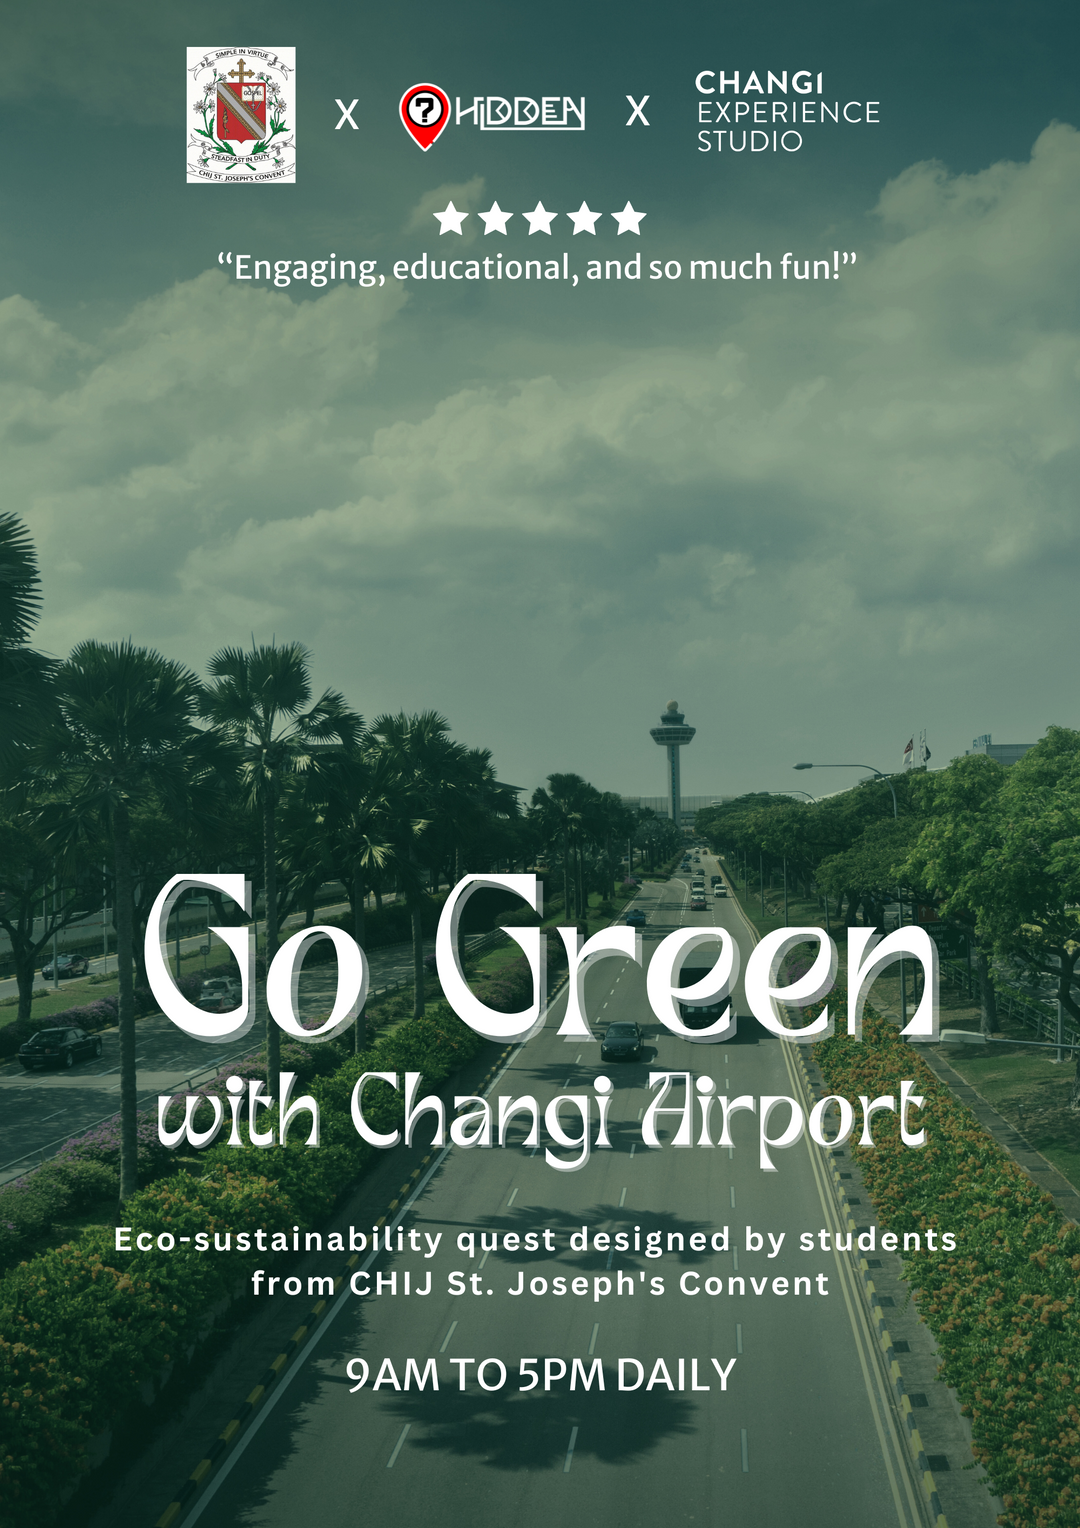 Go Green with Changi Airport